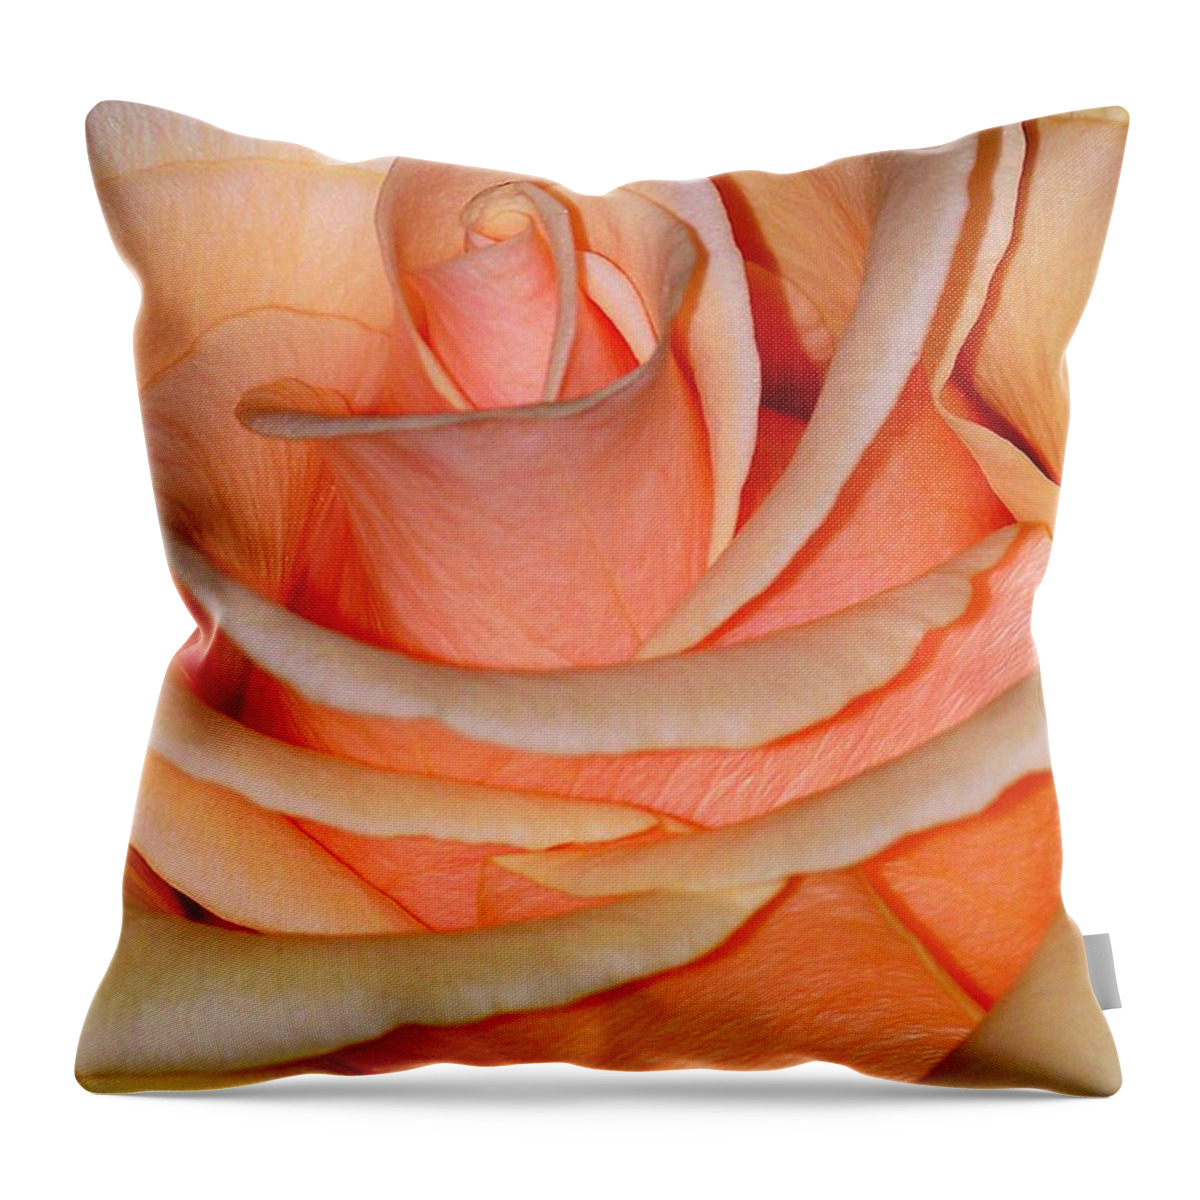 Rose Throw Pillow featuring the photograph Rose #1 by Sylvie Leandre